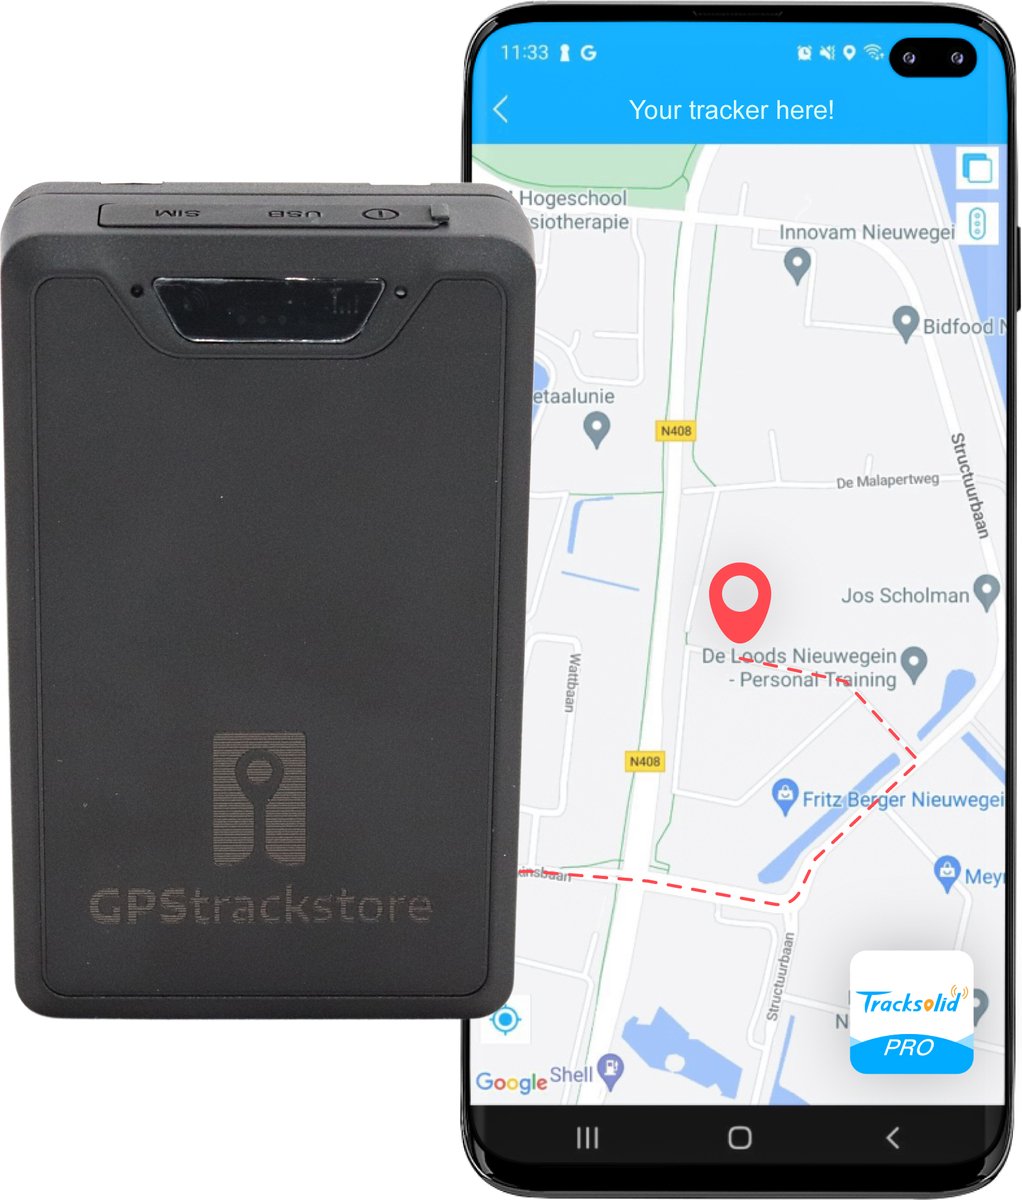 Gps Traceur Voiture pas cher - Achat neuf et occasion